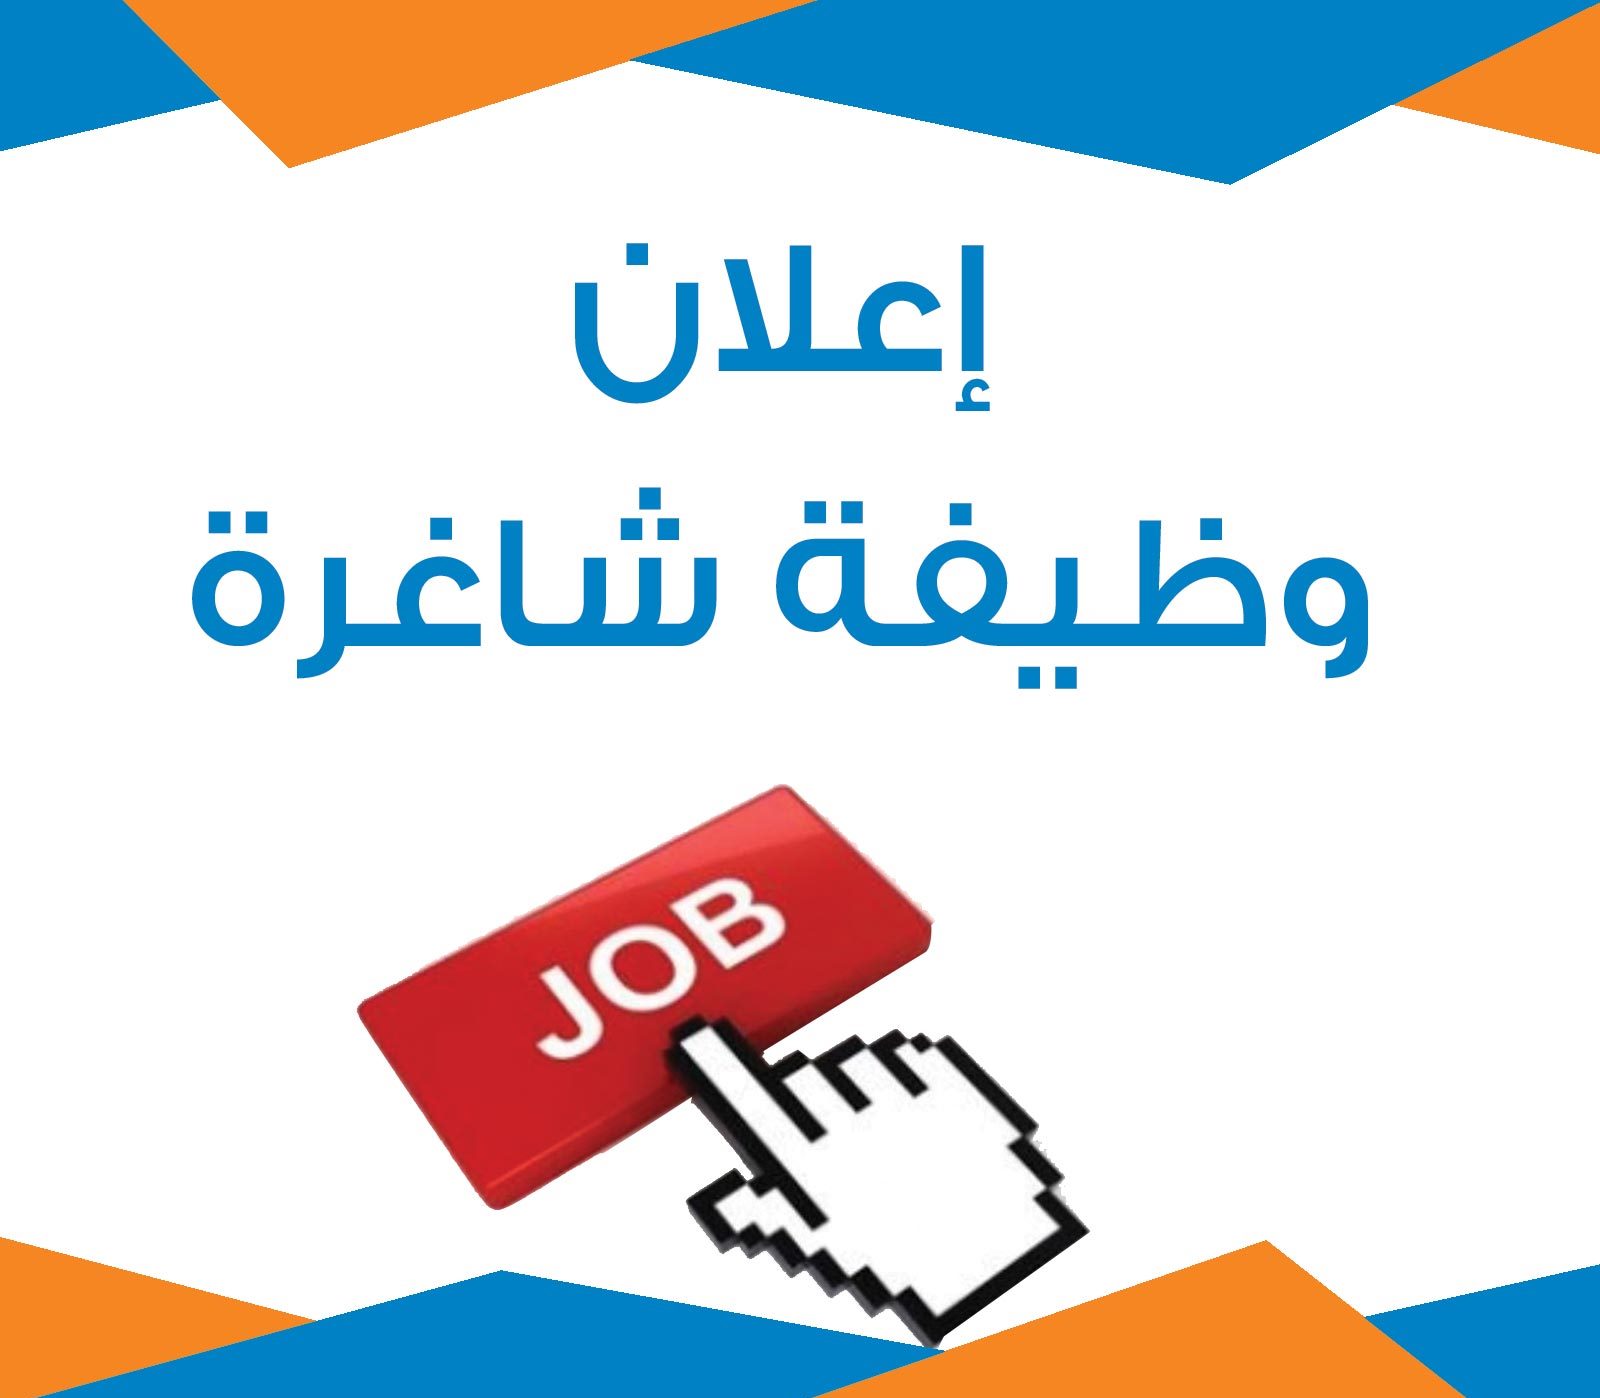 Advertising about Social Development Center Manager